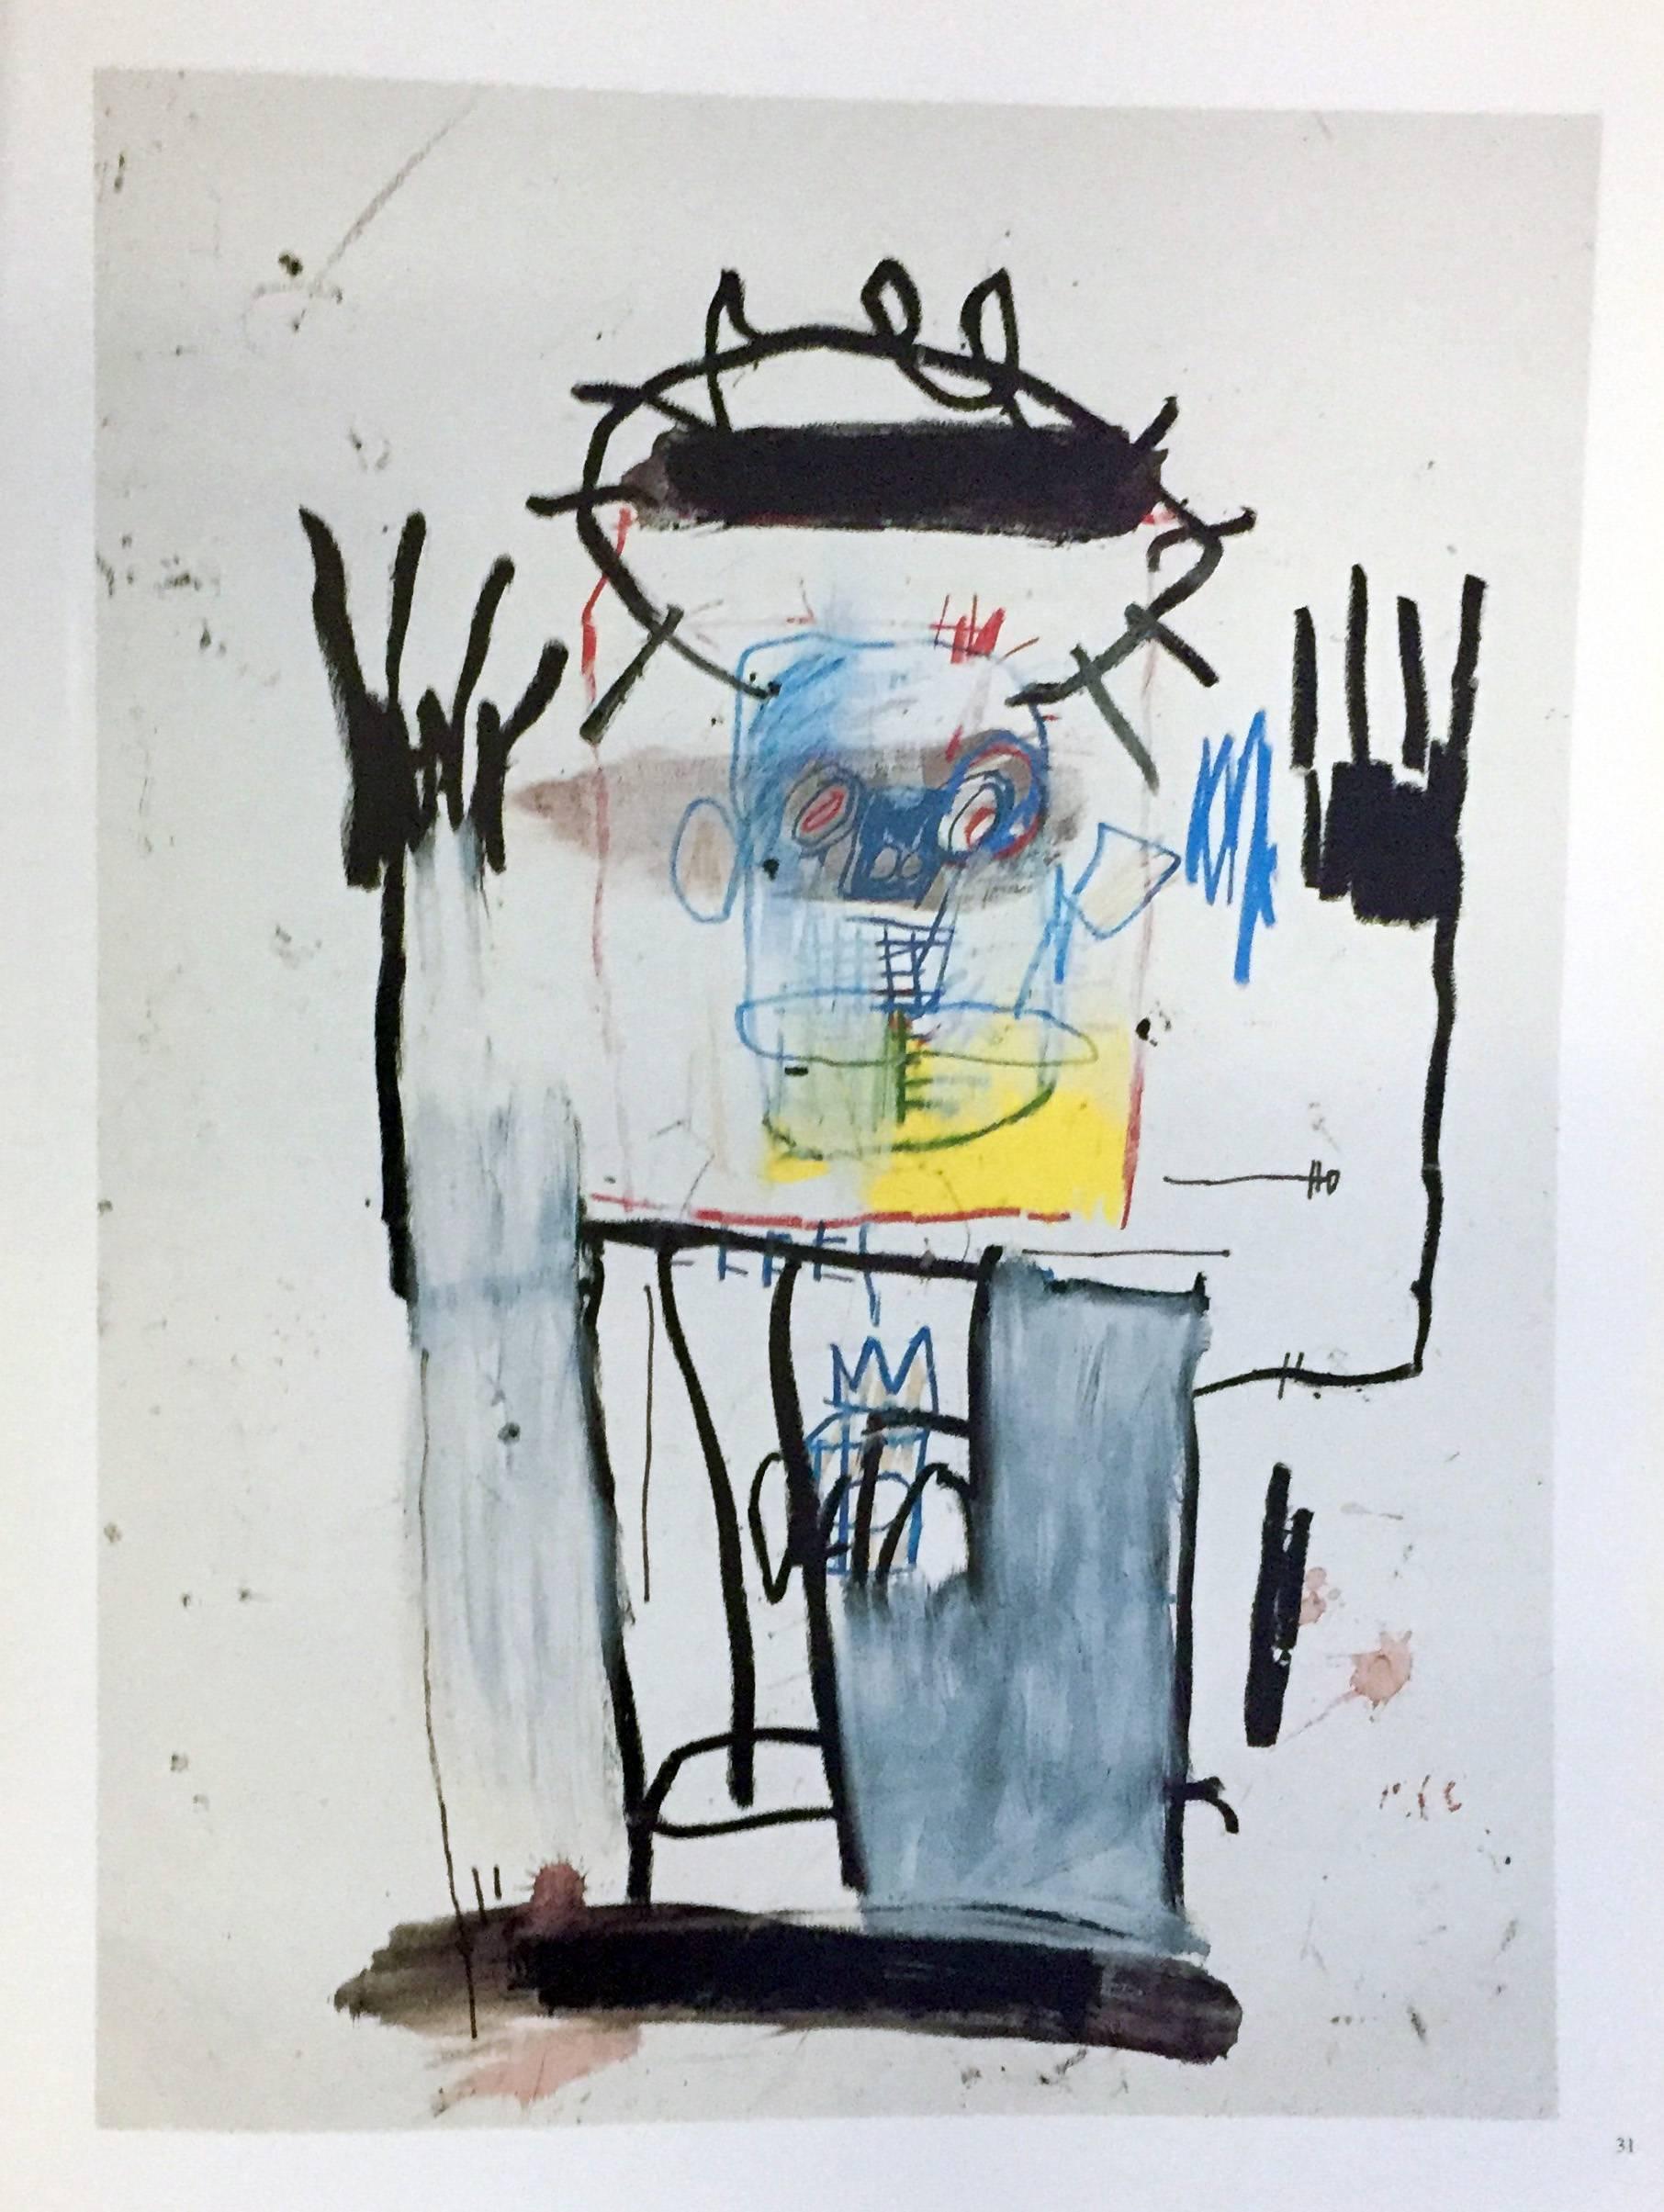 Basquiat Works on Paper Catalog, Buenos Aires - Pop Art Print by after Jean-Michel Basquiat